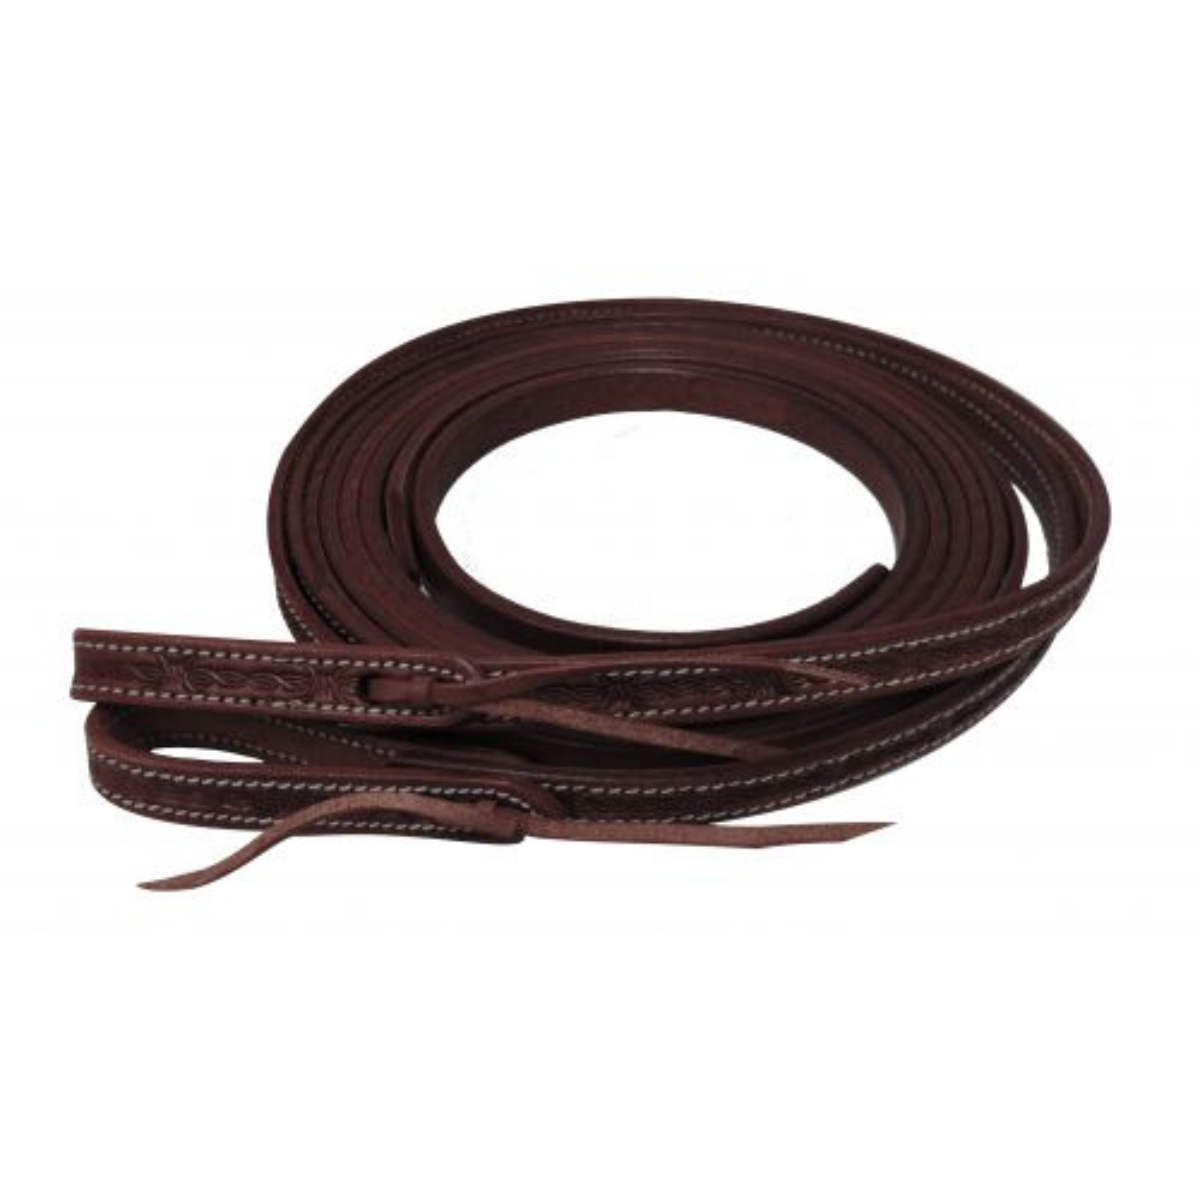 Showman ®  5/8" x 8ft Argentina cow leather barbed wire tooled split reins. - Double T Saddles